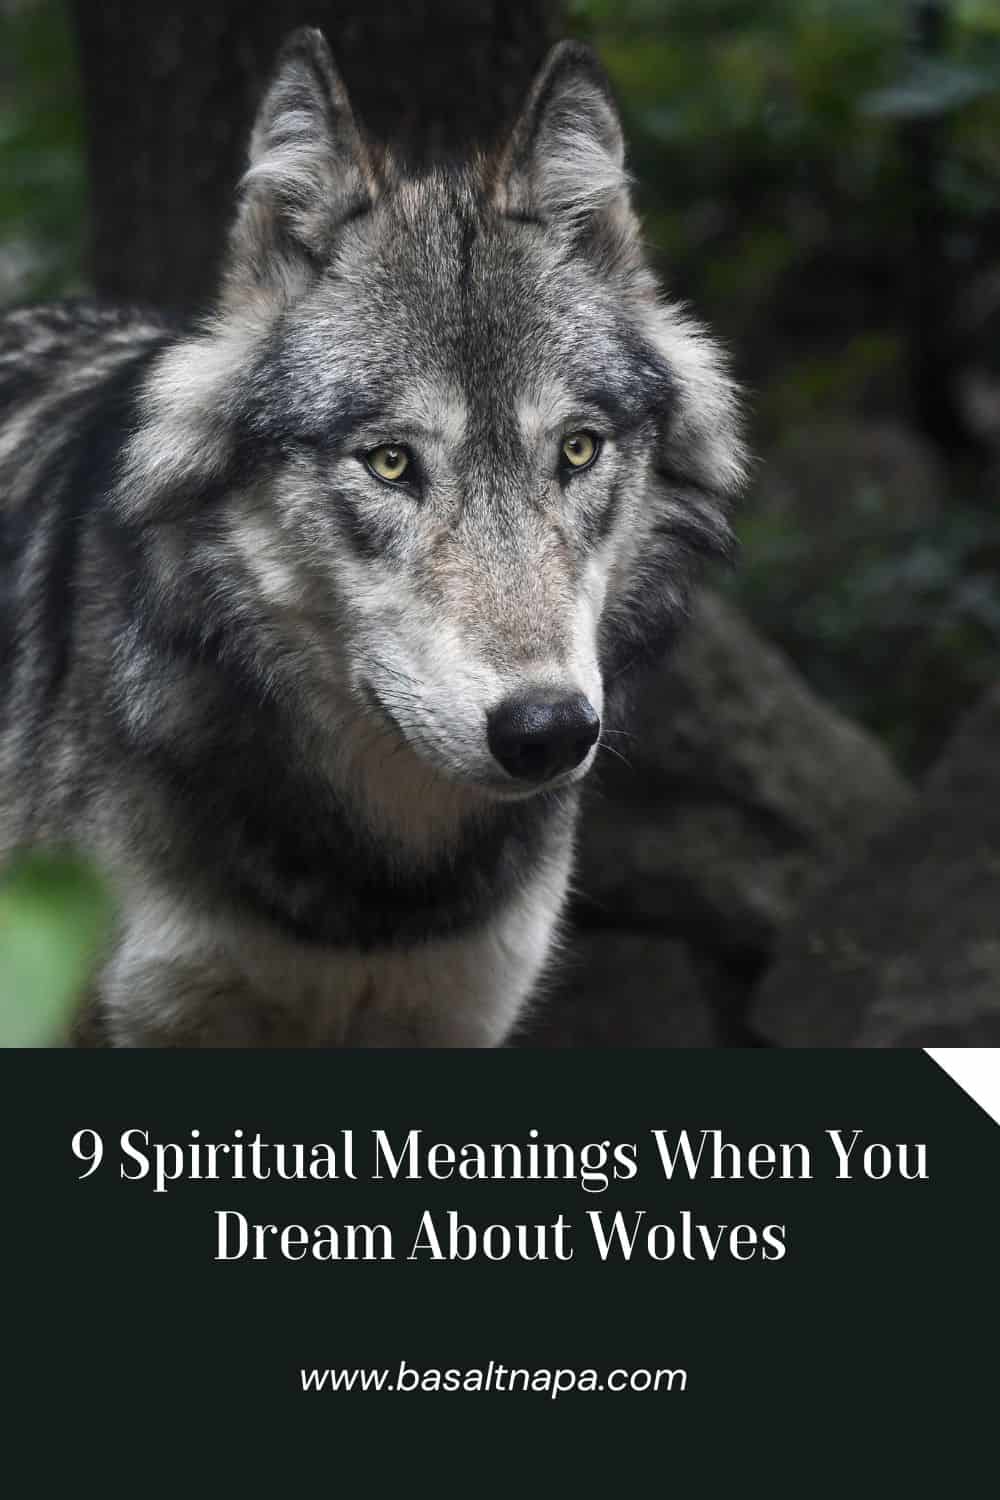 9 Spiritual Meanings When You Dream About Wolves